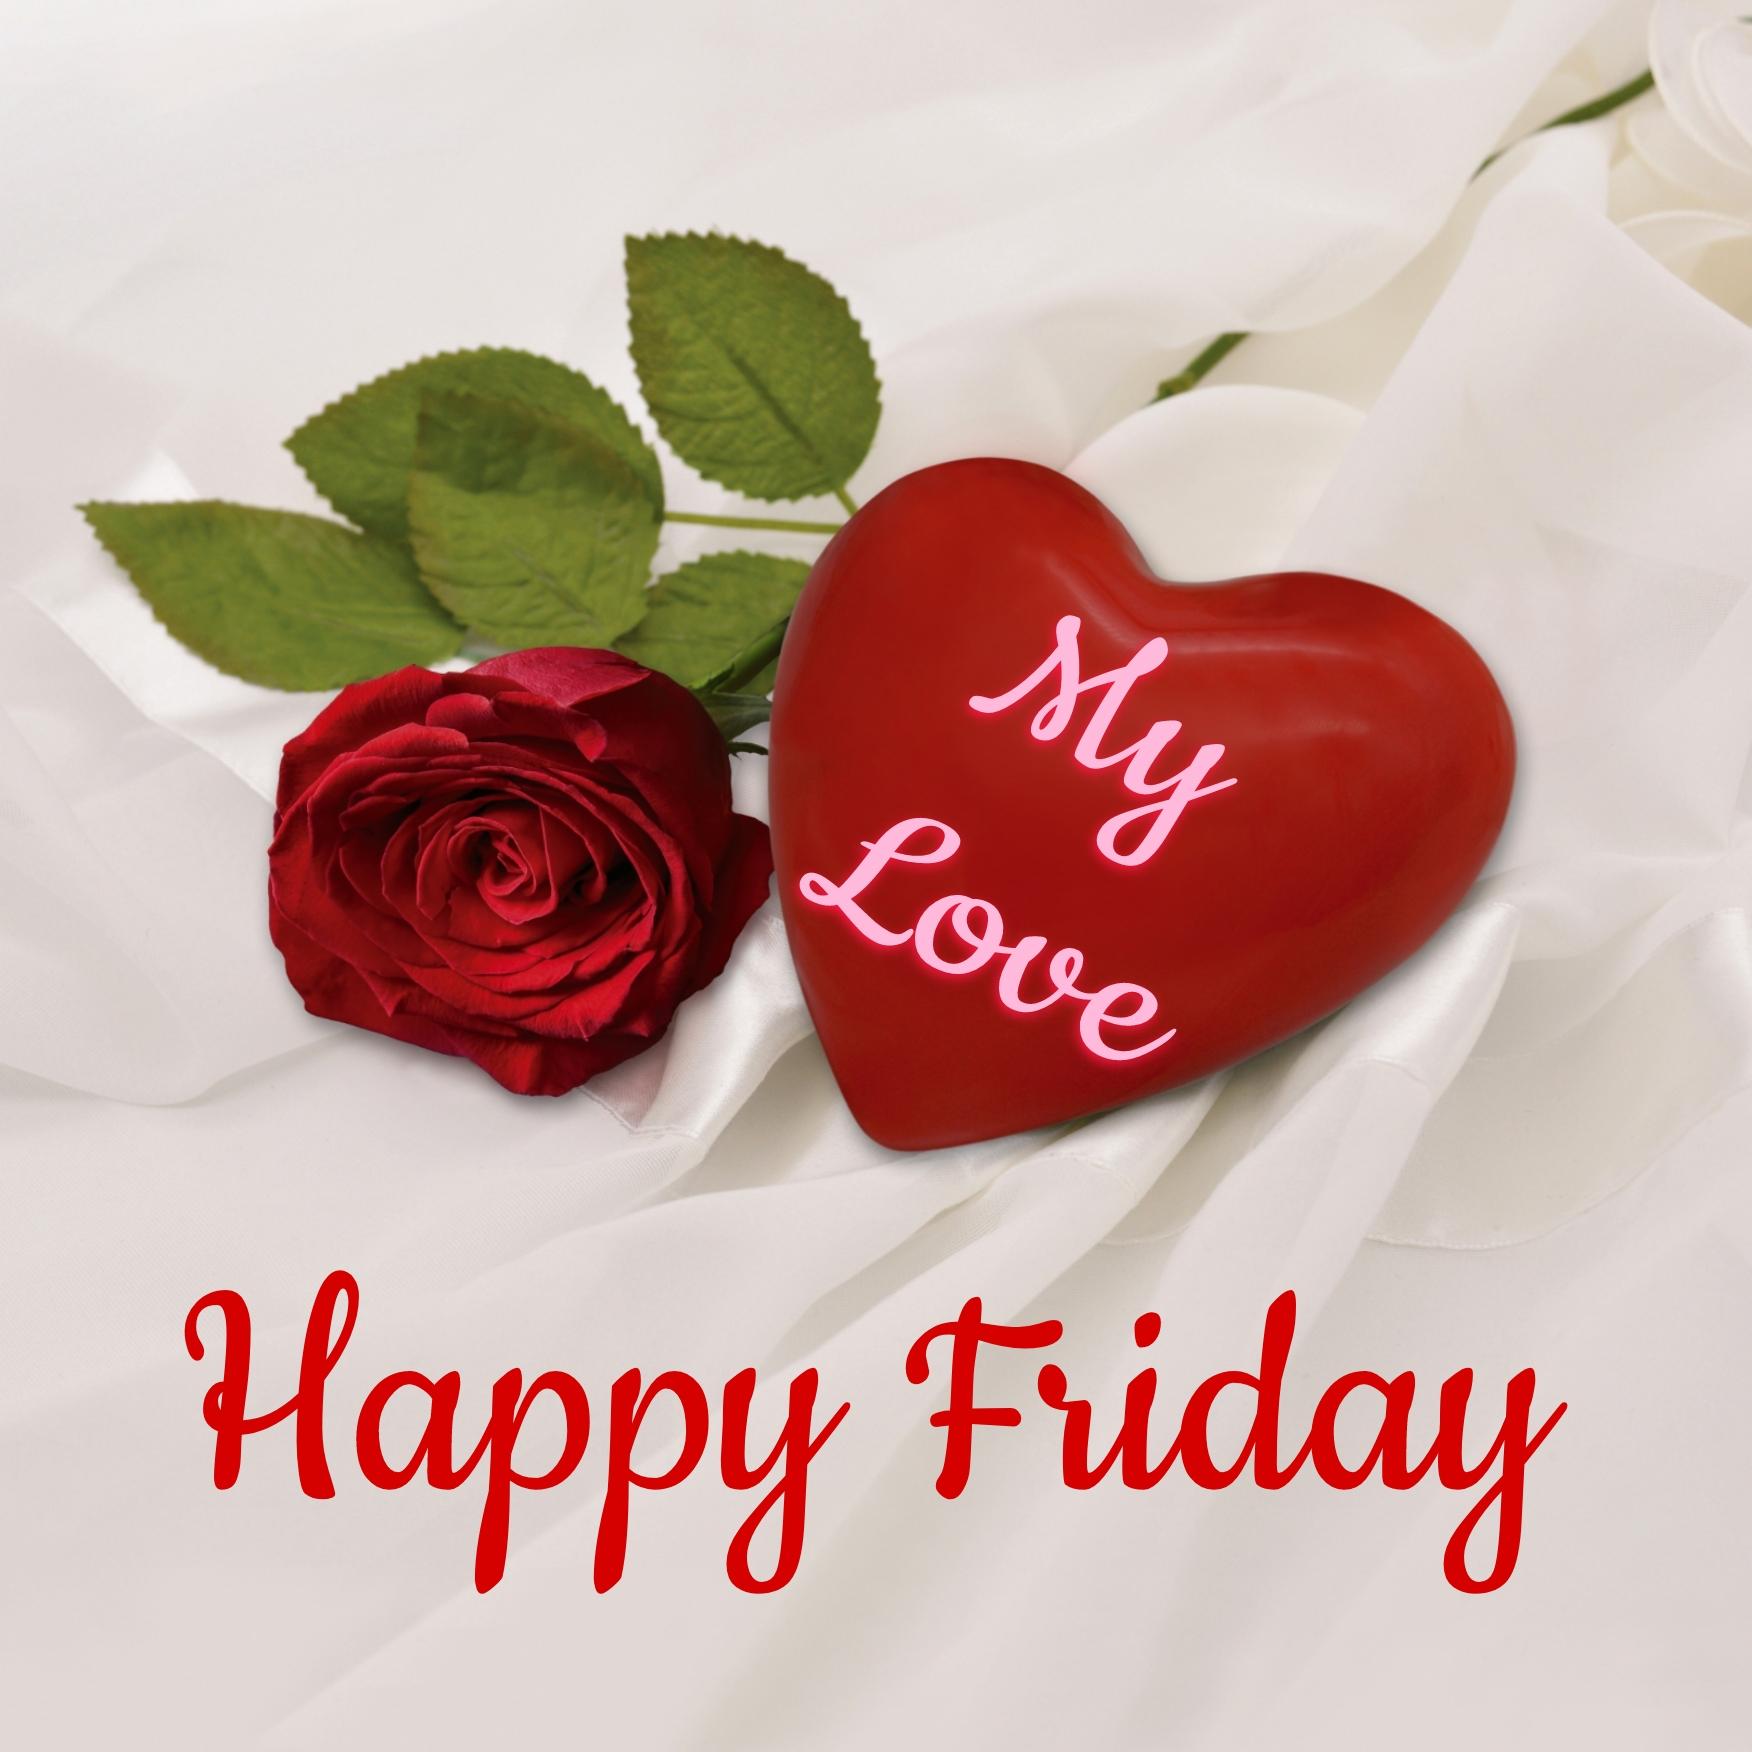 Happy Friday My Love Images for Husband